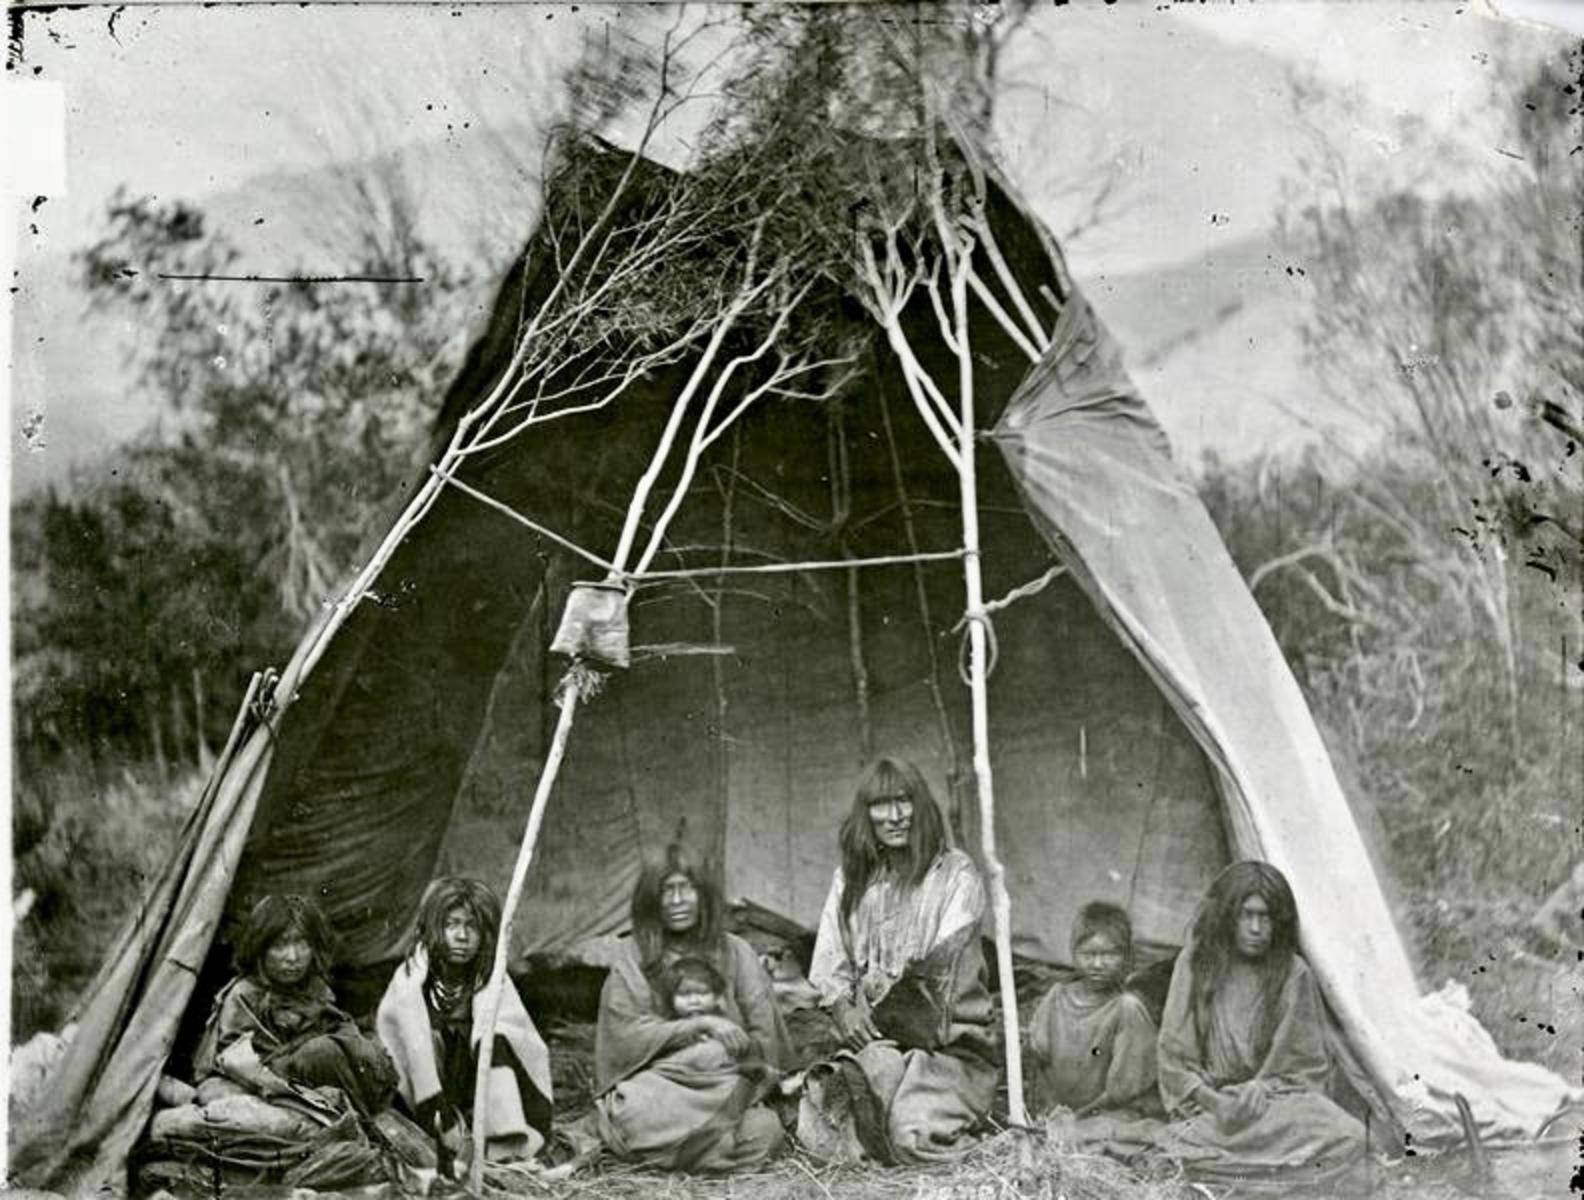 A family of Sheepaters (Tukudika) west of Yellowstone in 1871. The photograph was taken by William Henry Jackson who along with painter Thomas Moran created visual imagery that convinced Congress to set aside the lands of current day Yellowstone as a national park. This image was taken as Medicine Lodge Creek in Idaho. Much speculation swirls around when and how many different tribes spent time in the high elevation terrain of Yellowstone. Did indigenous people live there year round? Todd Burritt finds it strange that author Megan Kate Nelson spends more time referencing the Lakota in her book than she does the Sheepeaters, Crow and other tribes. Photo courtesy National Park Service. 